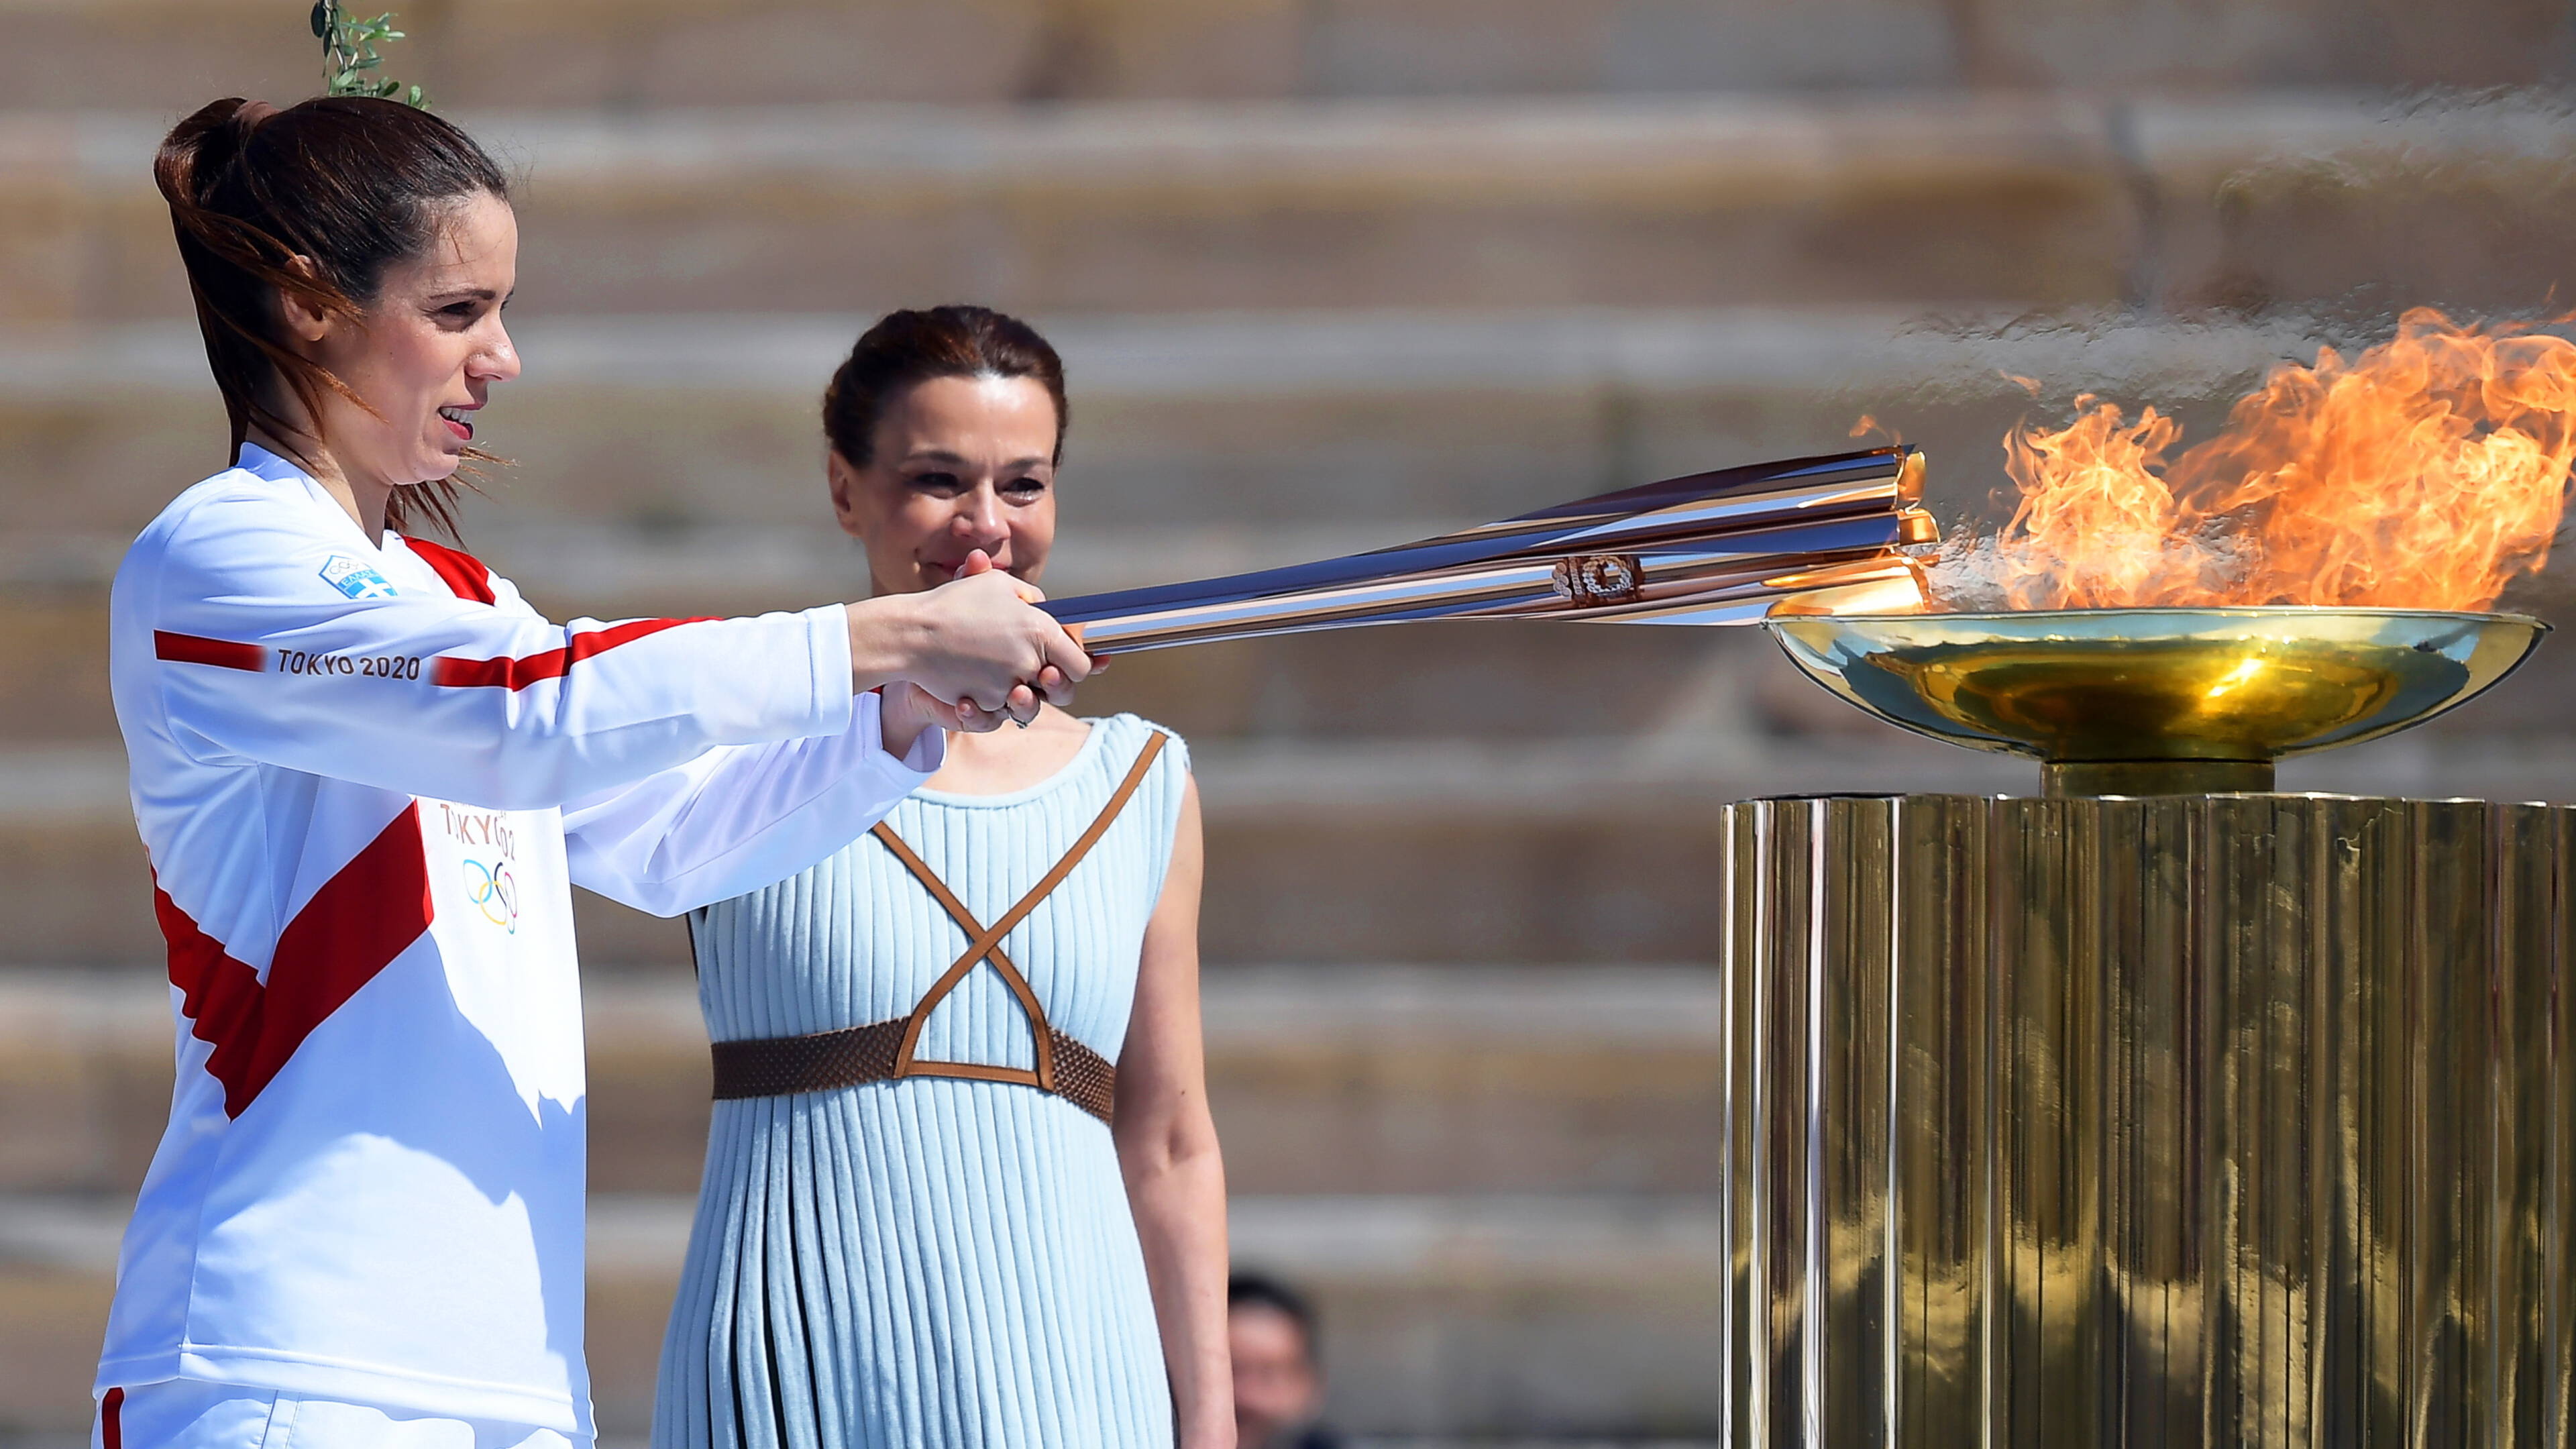 Olympic Flame: Lighting of the Olympic torch, Flame Handover Ceremony, Tokyo 2020 Summer Olympics, Greece. 3840x2160 4K Background.